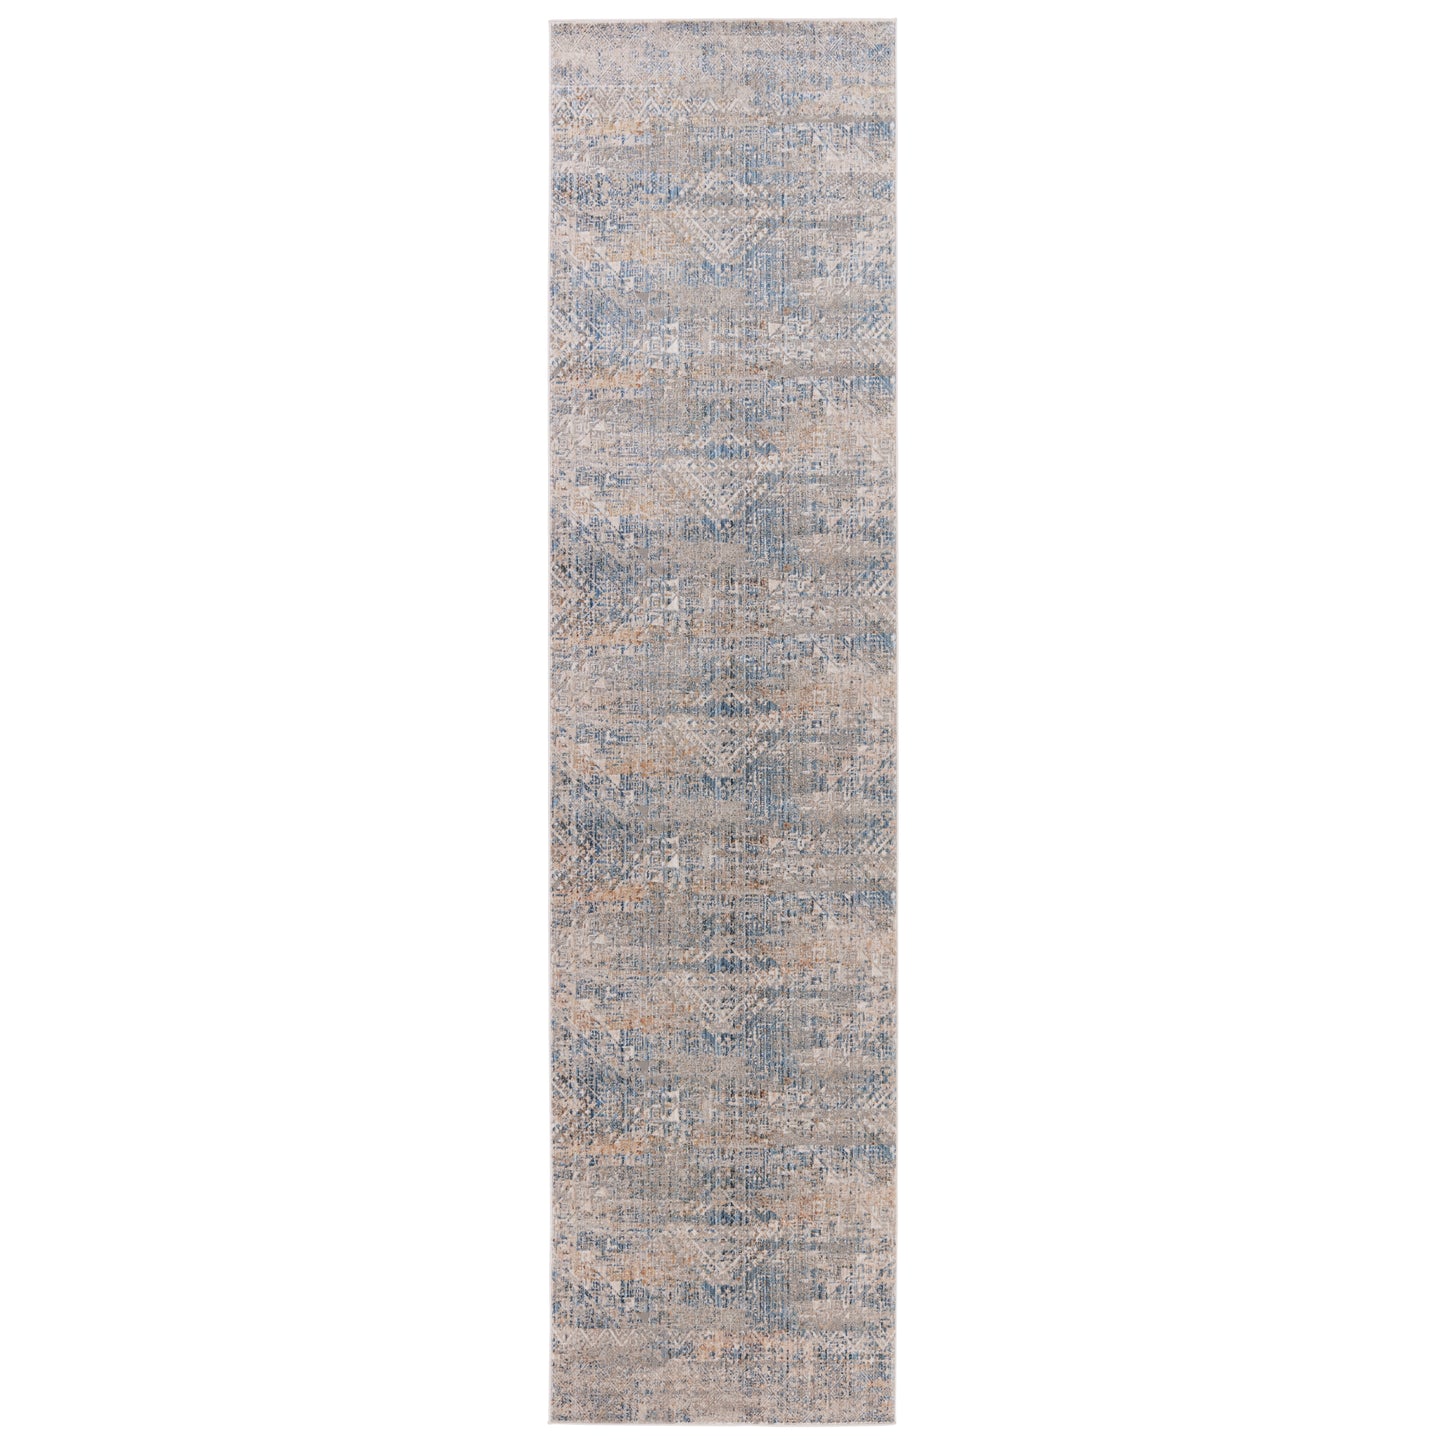 Audun Louden Machine Made Synthetic Blend Indoor Area Rug From Vibe by Jaipur Living